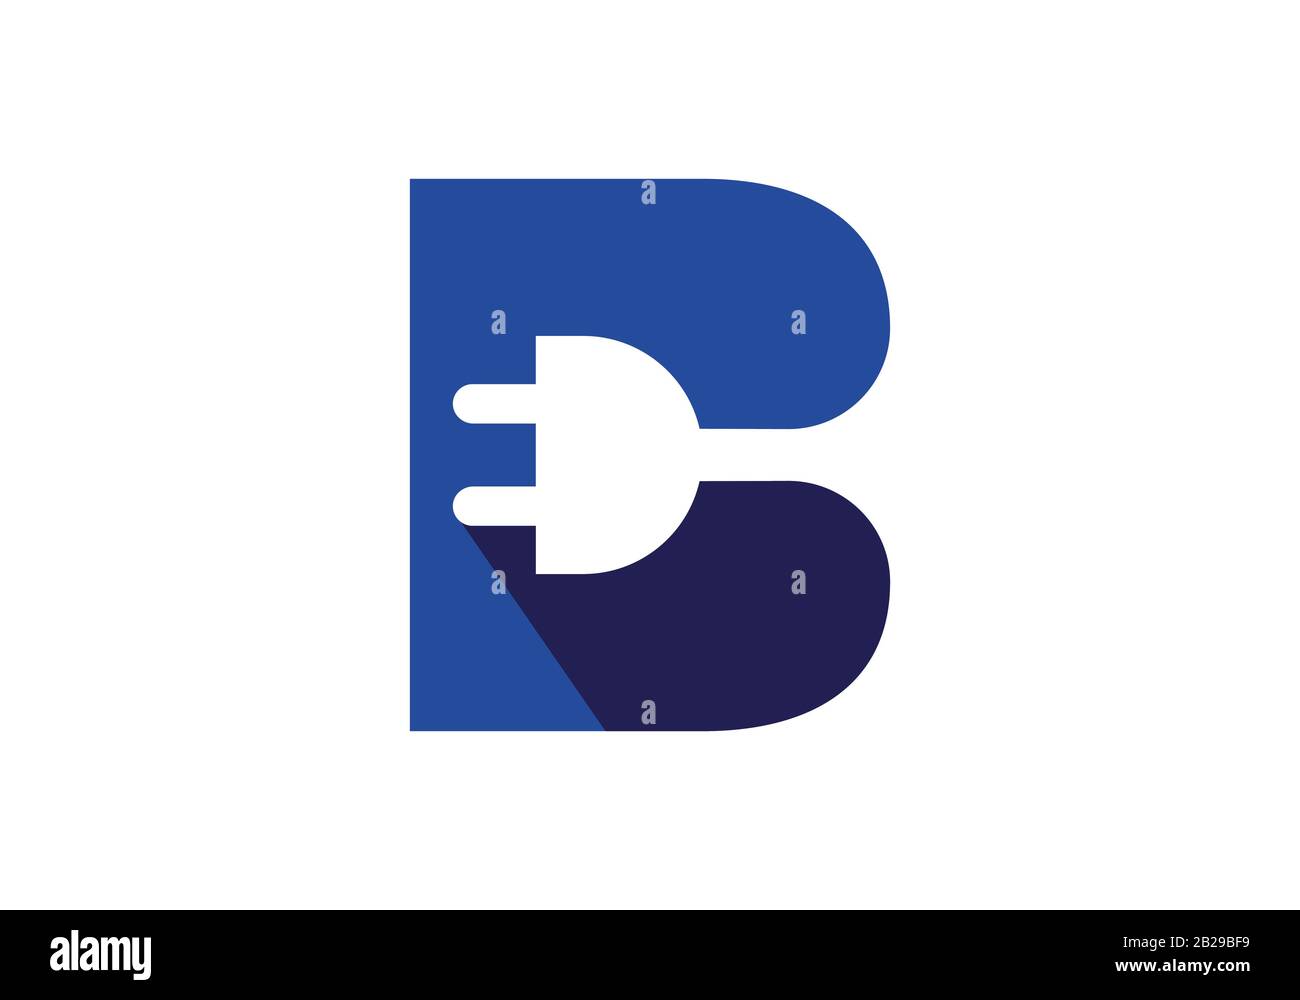 Initial B letter logo with plug sign symbol, Electricity company logo concept Stock Vector